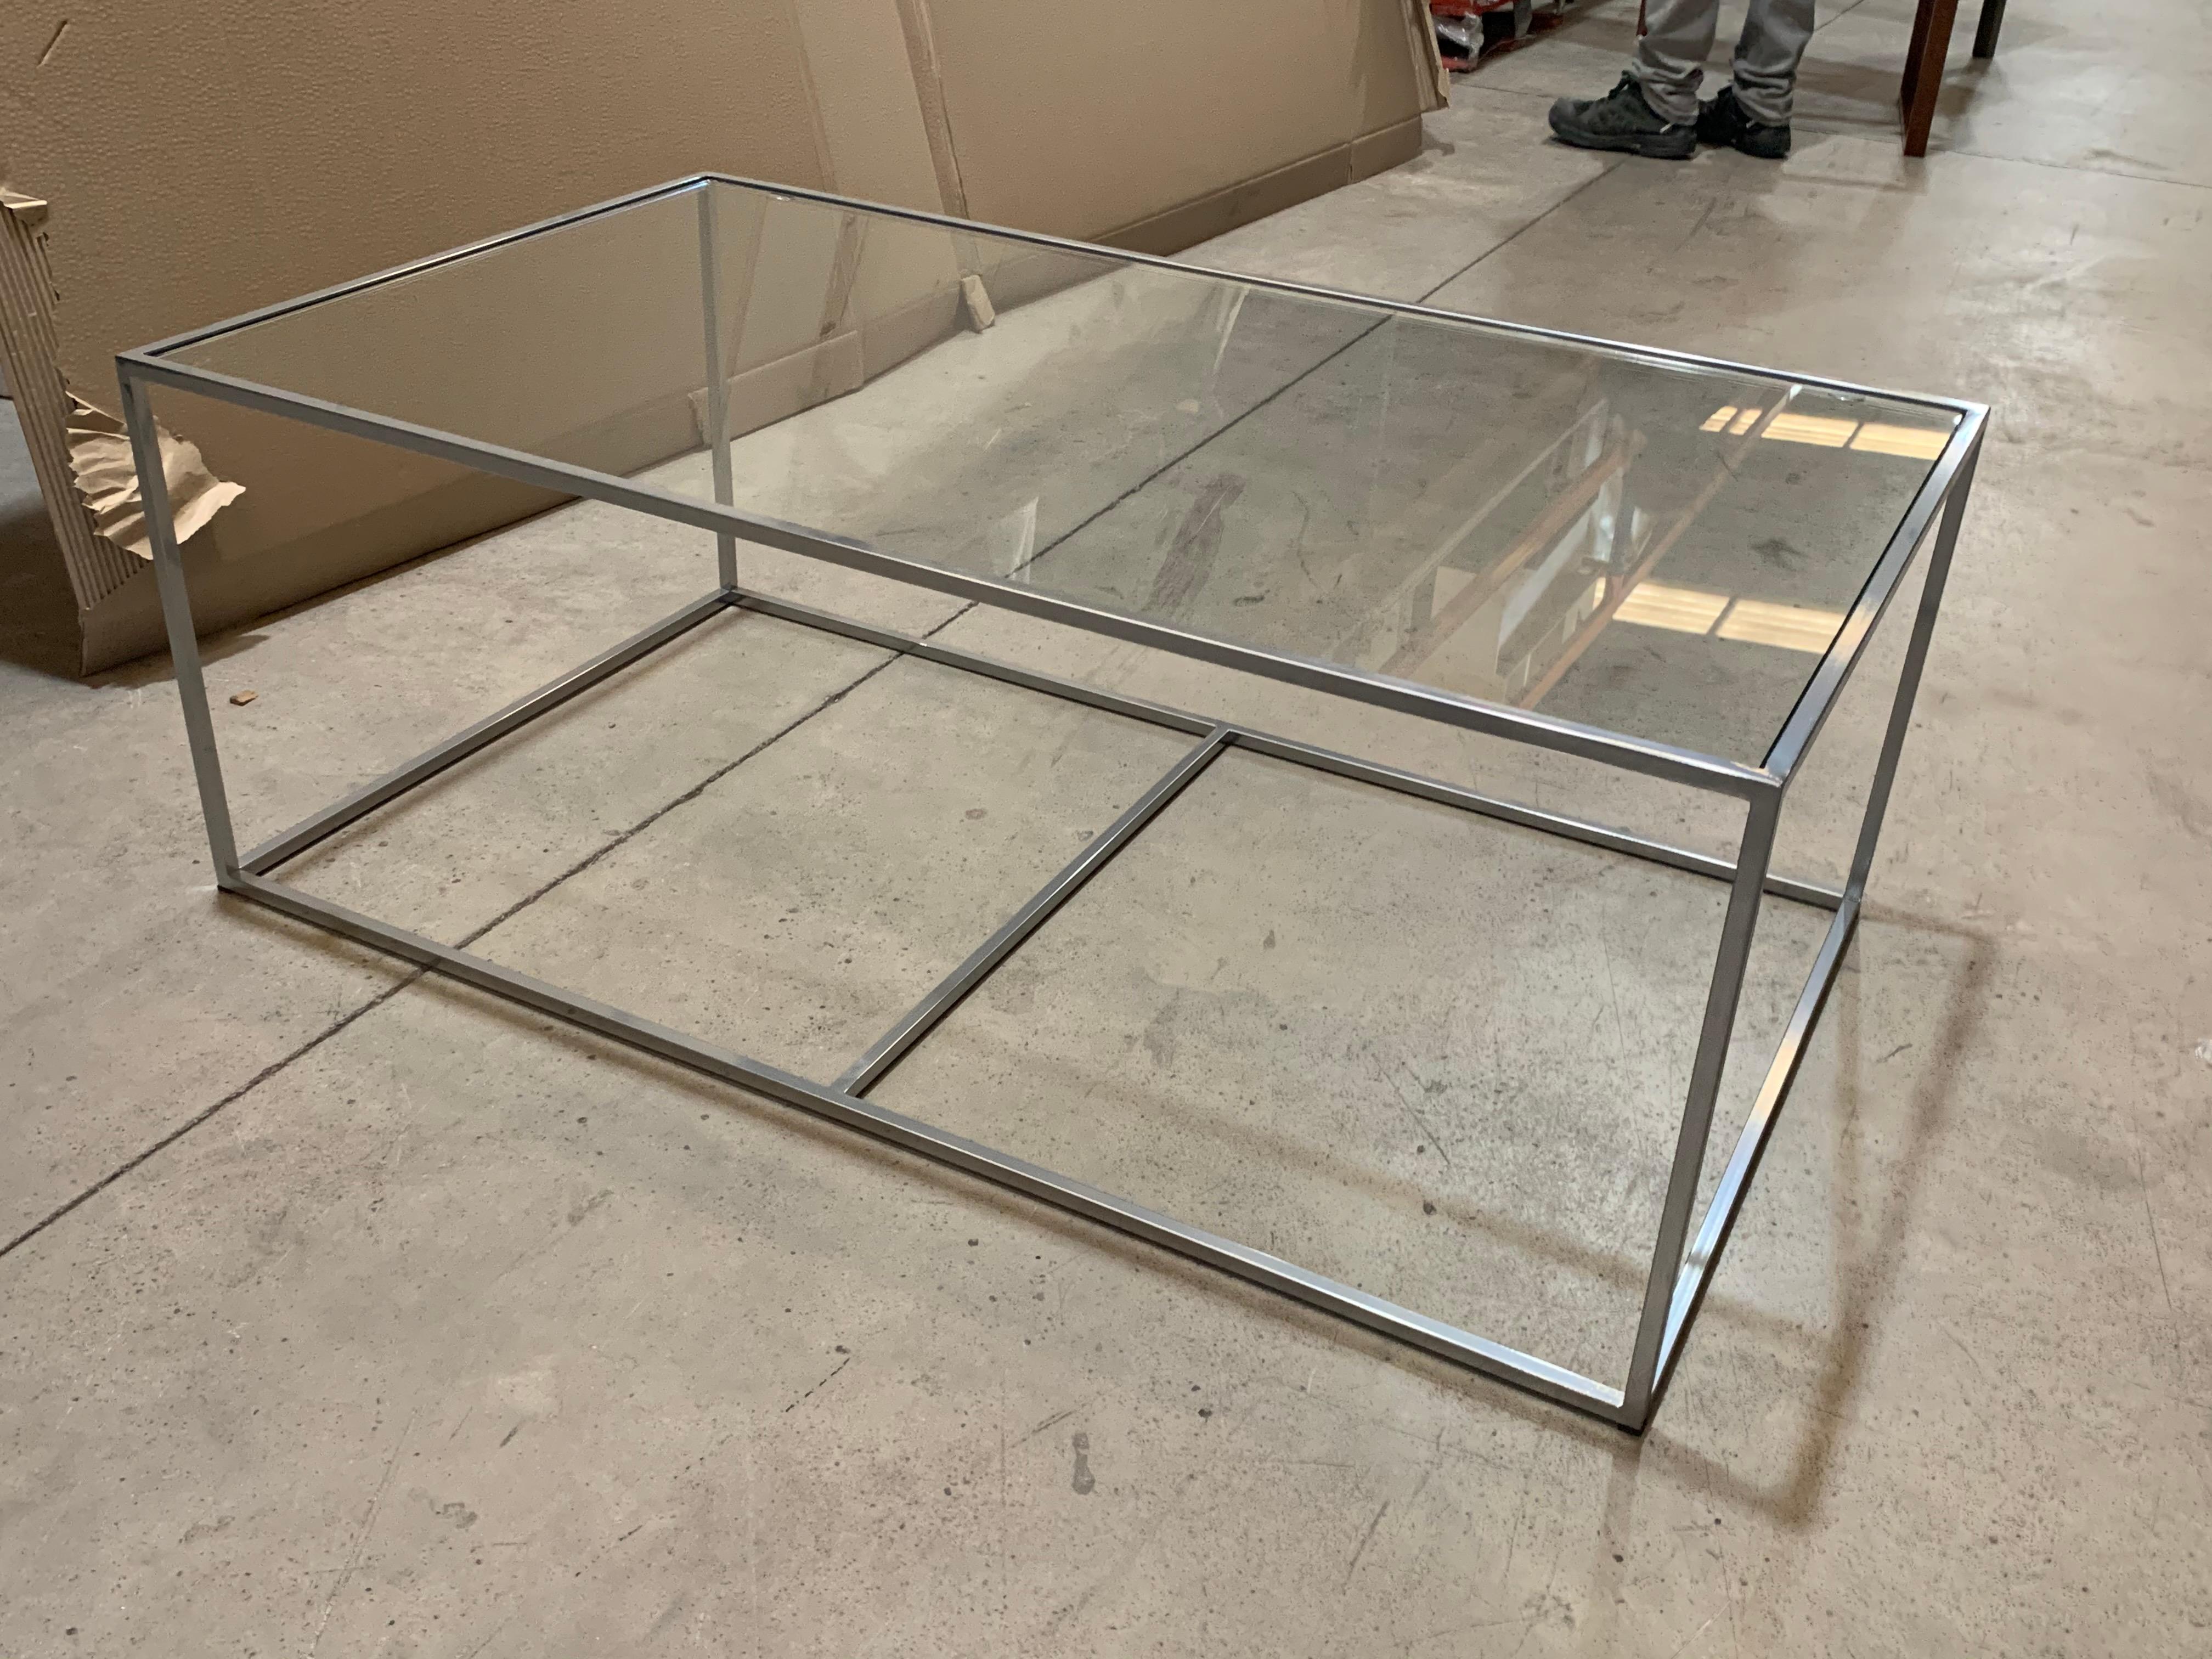 New modern rectangular white table with glass top. Indoor or outdoor.

Wrought iron.
 